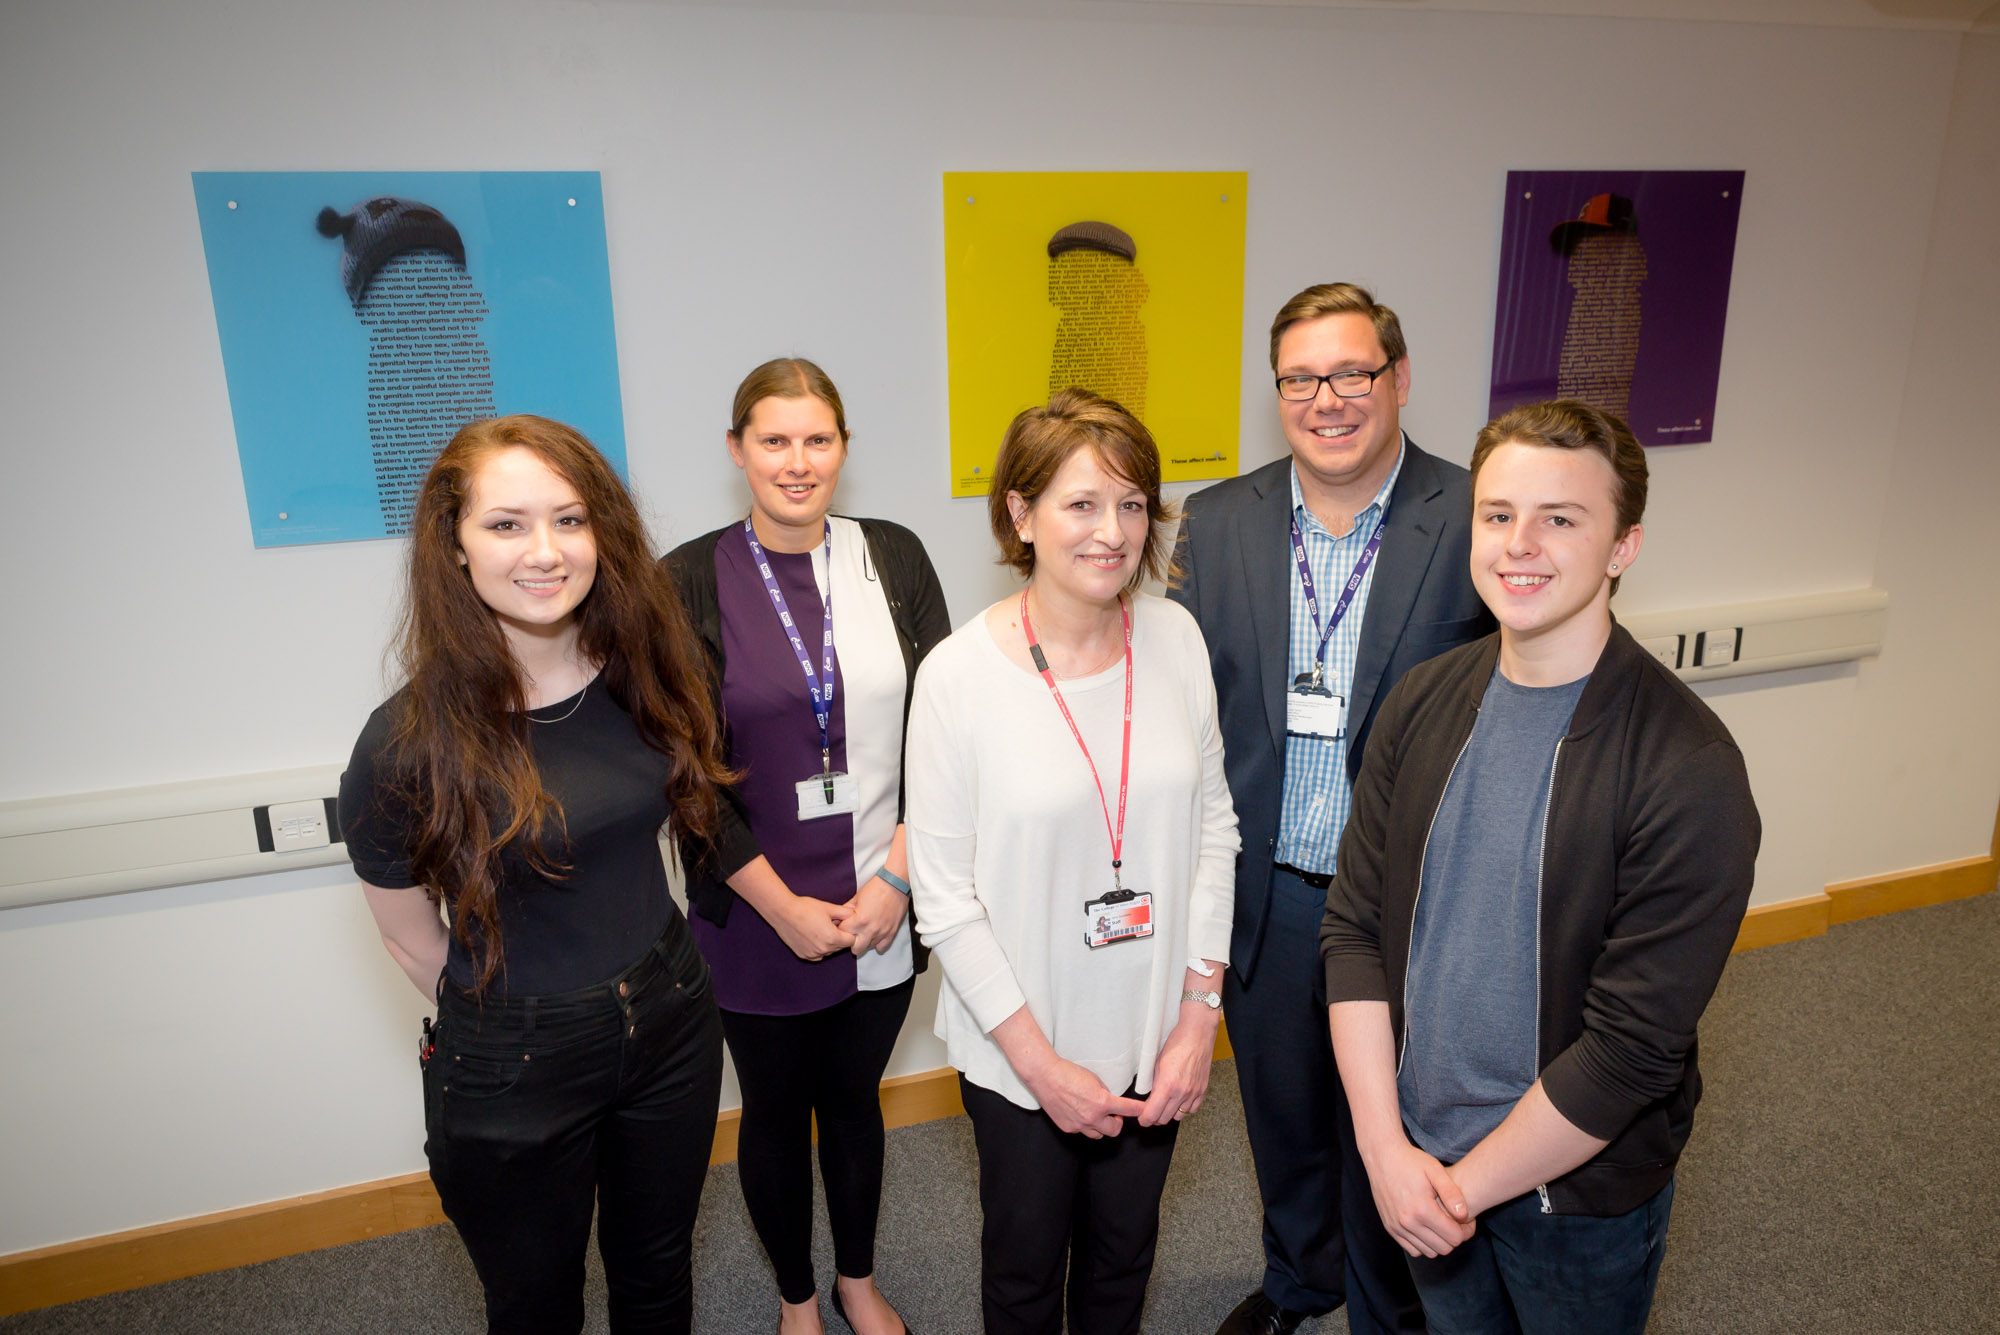 iCaSH team in Wisbech welcome college colleagues for artwork showcase